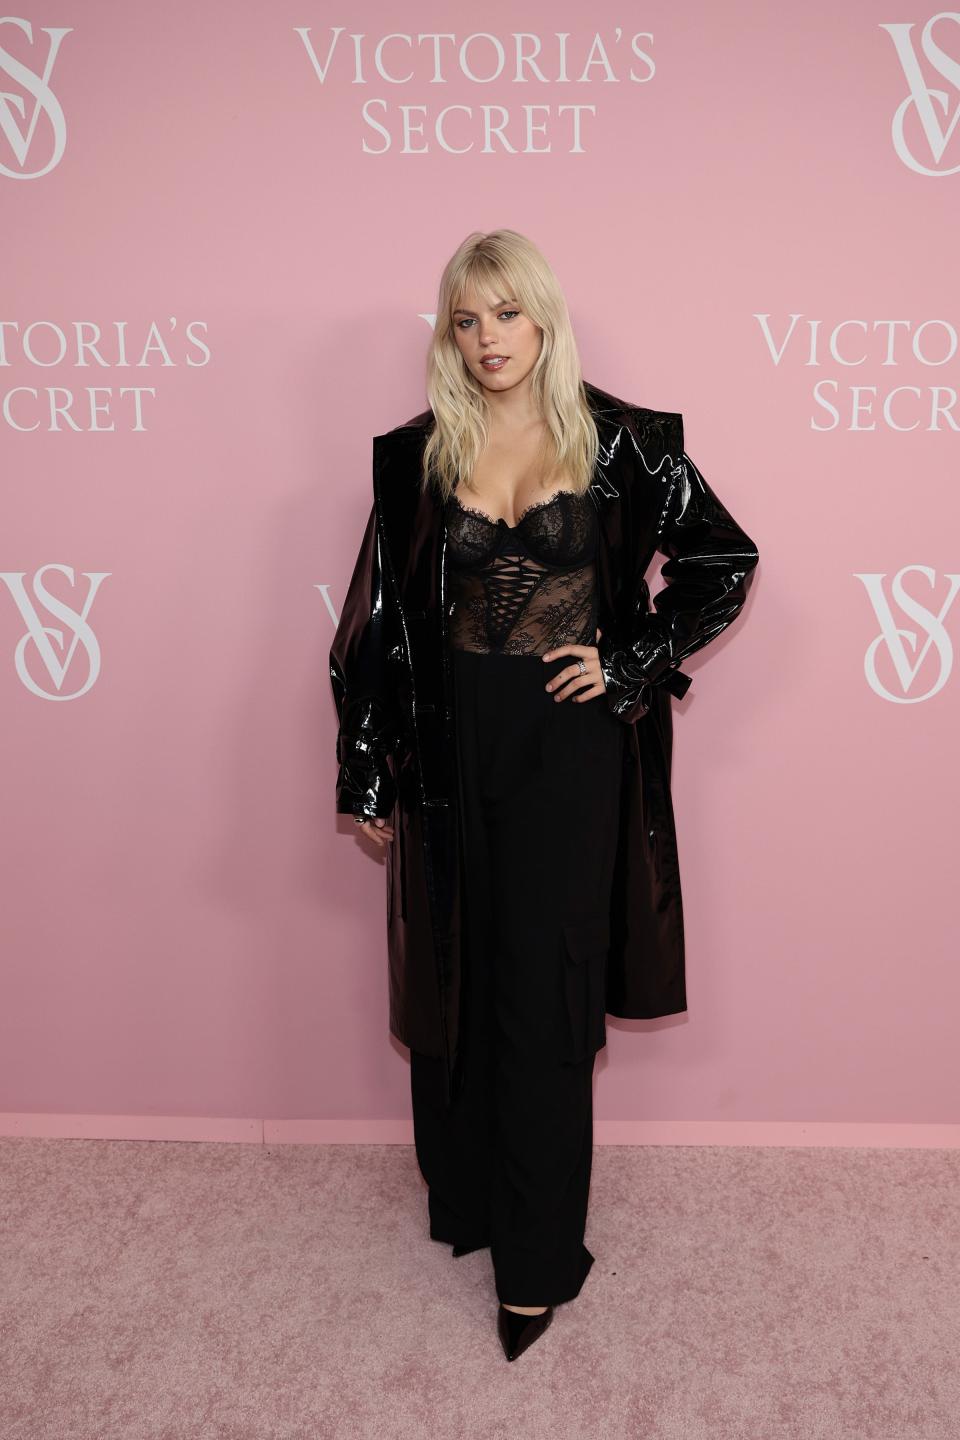 NEW YORK, NEW YORK - SEPTEMBER 06: Renee Rapp attends as Victoria's Secret Celebrates The Tour '23 at The Manhattan Center on September 06, 2023 in New York City. (Photo by Dimitrios Kambouris/Getty Images for Victoria's Secret) ORG XMIT: 776007585 ORIG FILE ID: 1664661779